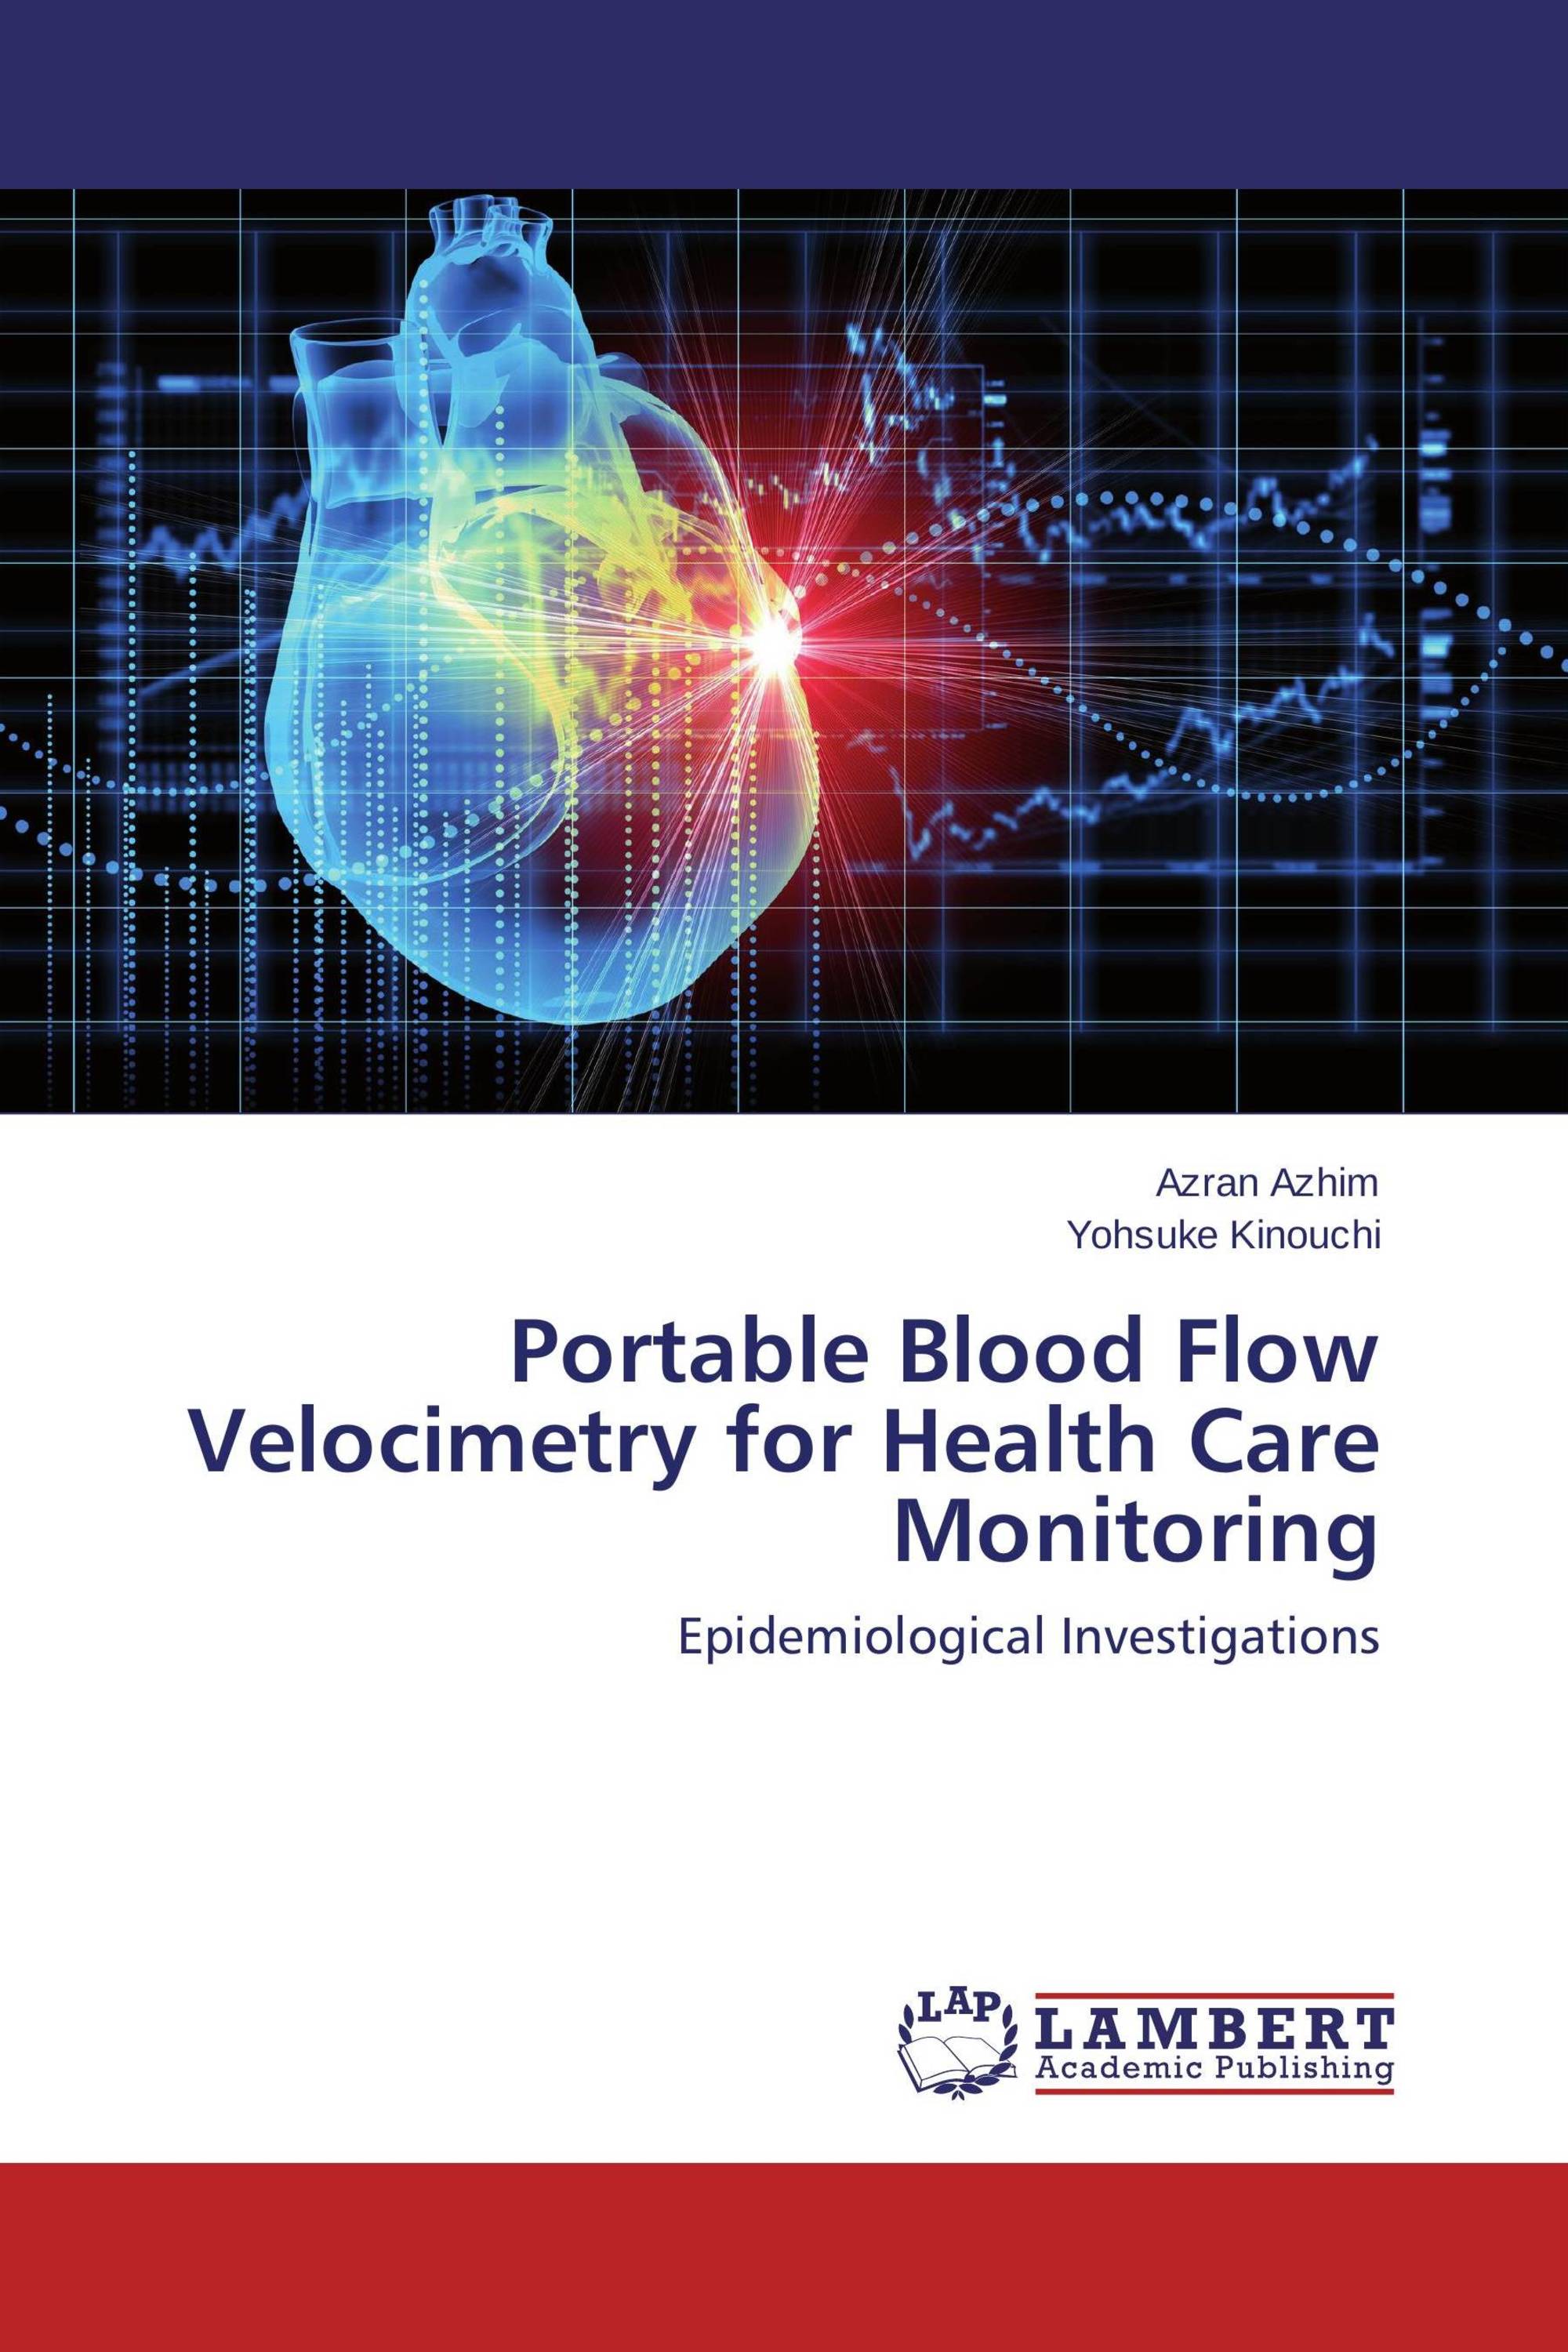 Portable Blood Flow Velocimetry for Health Care Monitoring